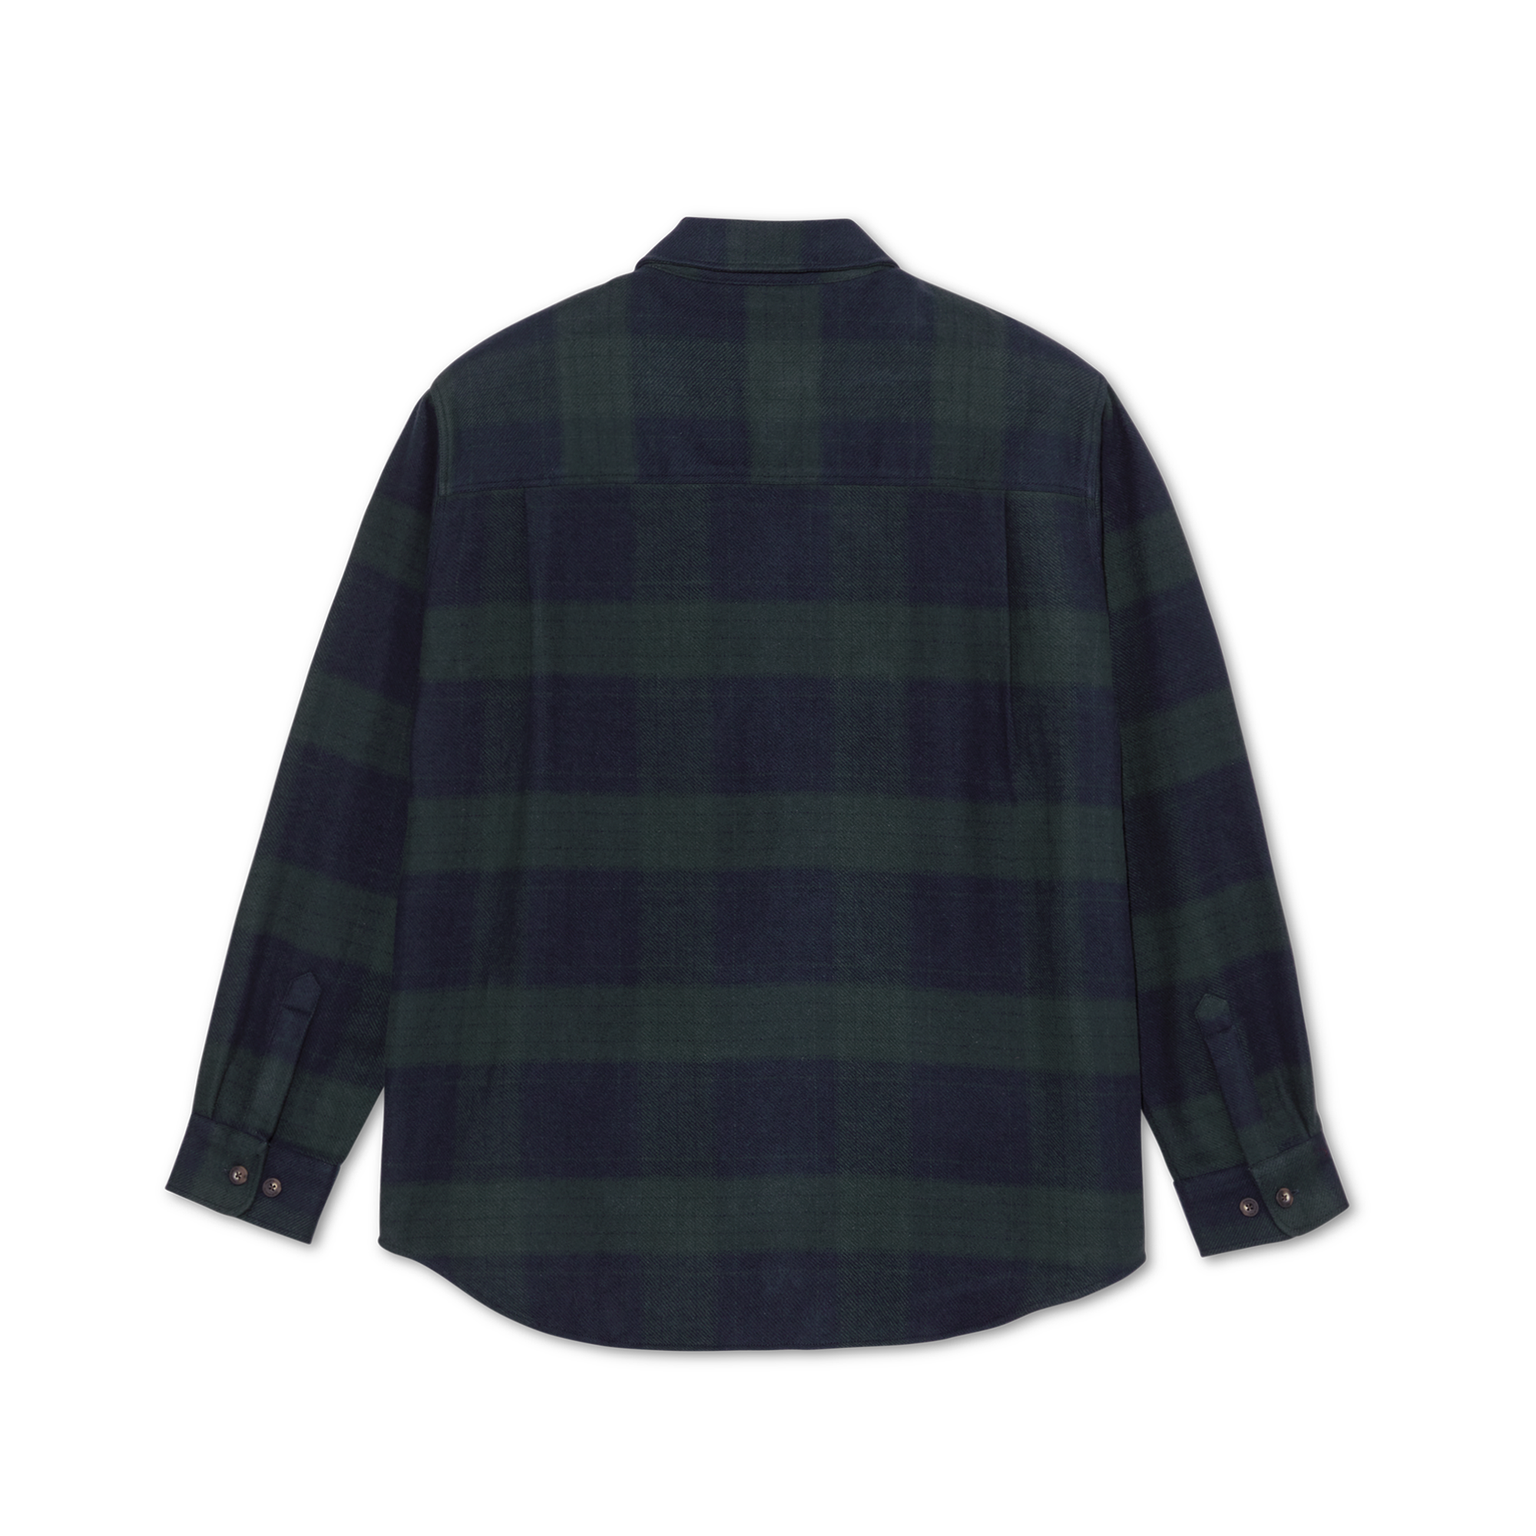 MIKE LS SHIRT FLANNEL NAVY TEAL